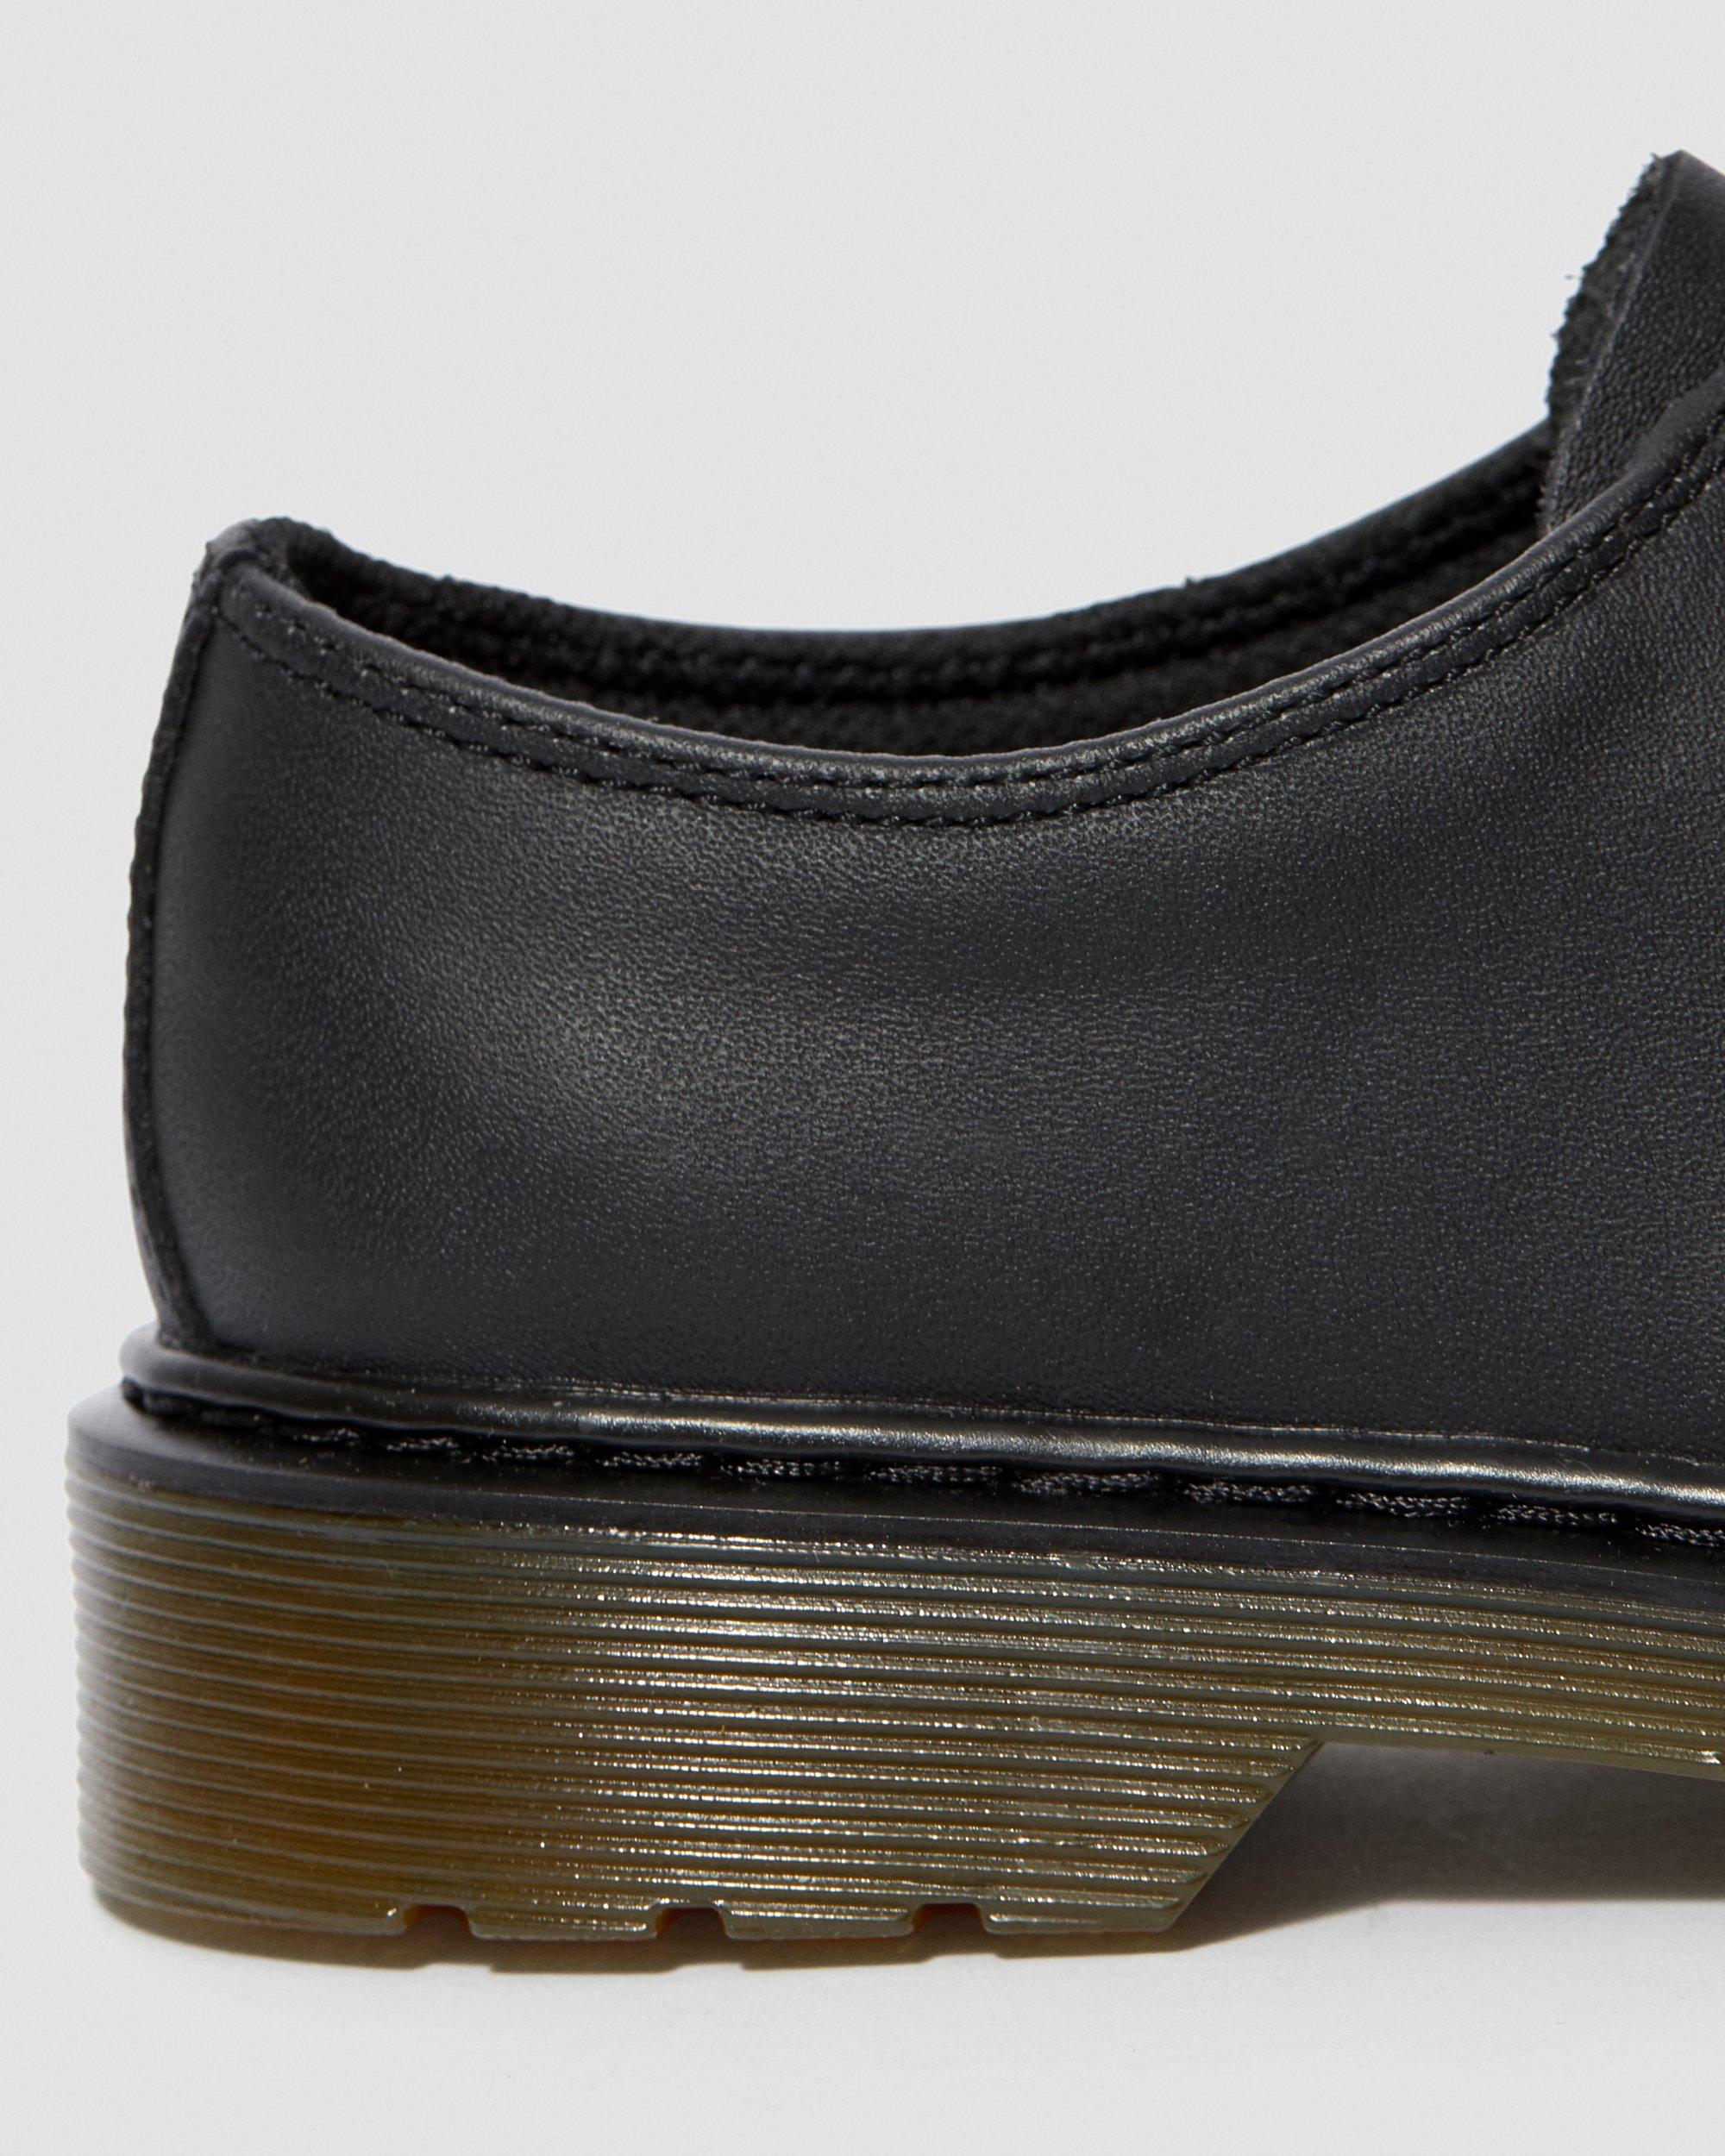 Youth 1461 Leather Oxford Shoes in Black